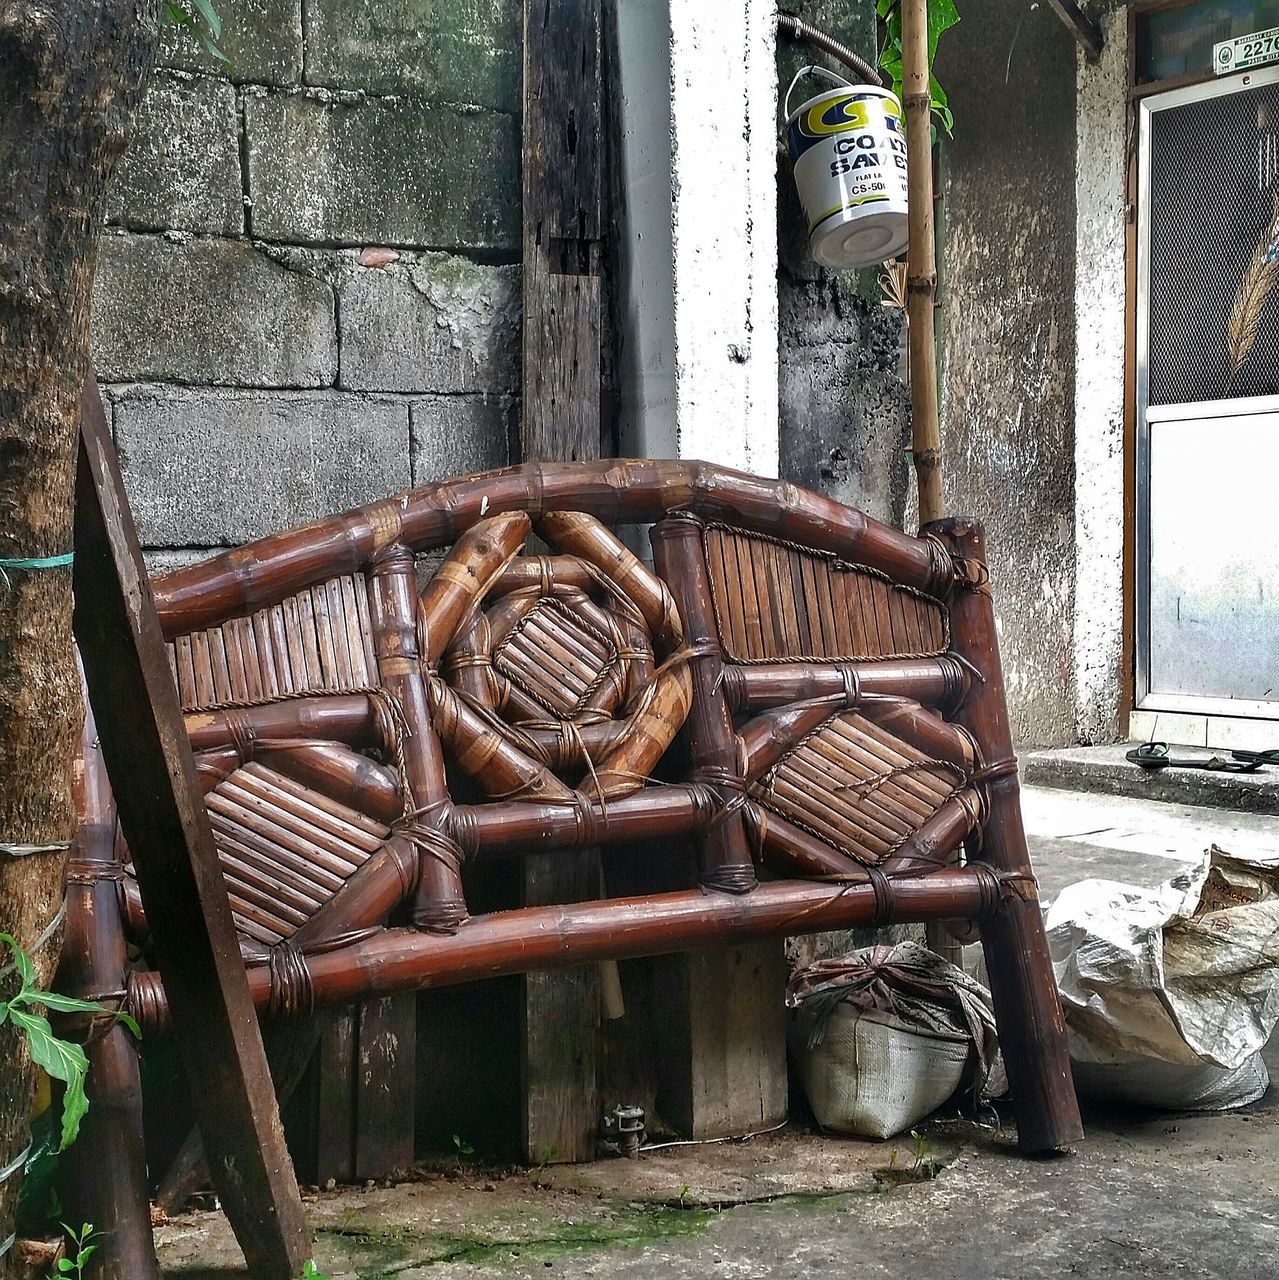 old, abandoned, obsolete, metal, wood - material, damaged, run-down, chair, rusty, built structure, house, deterioration, old-fashioned, weathered, architecture, building exterior, absence, day, outdoors, closed